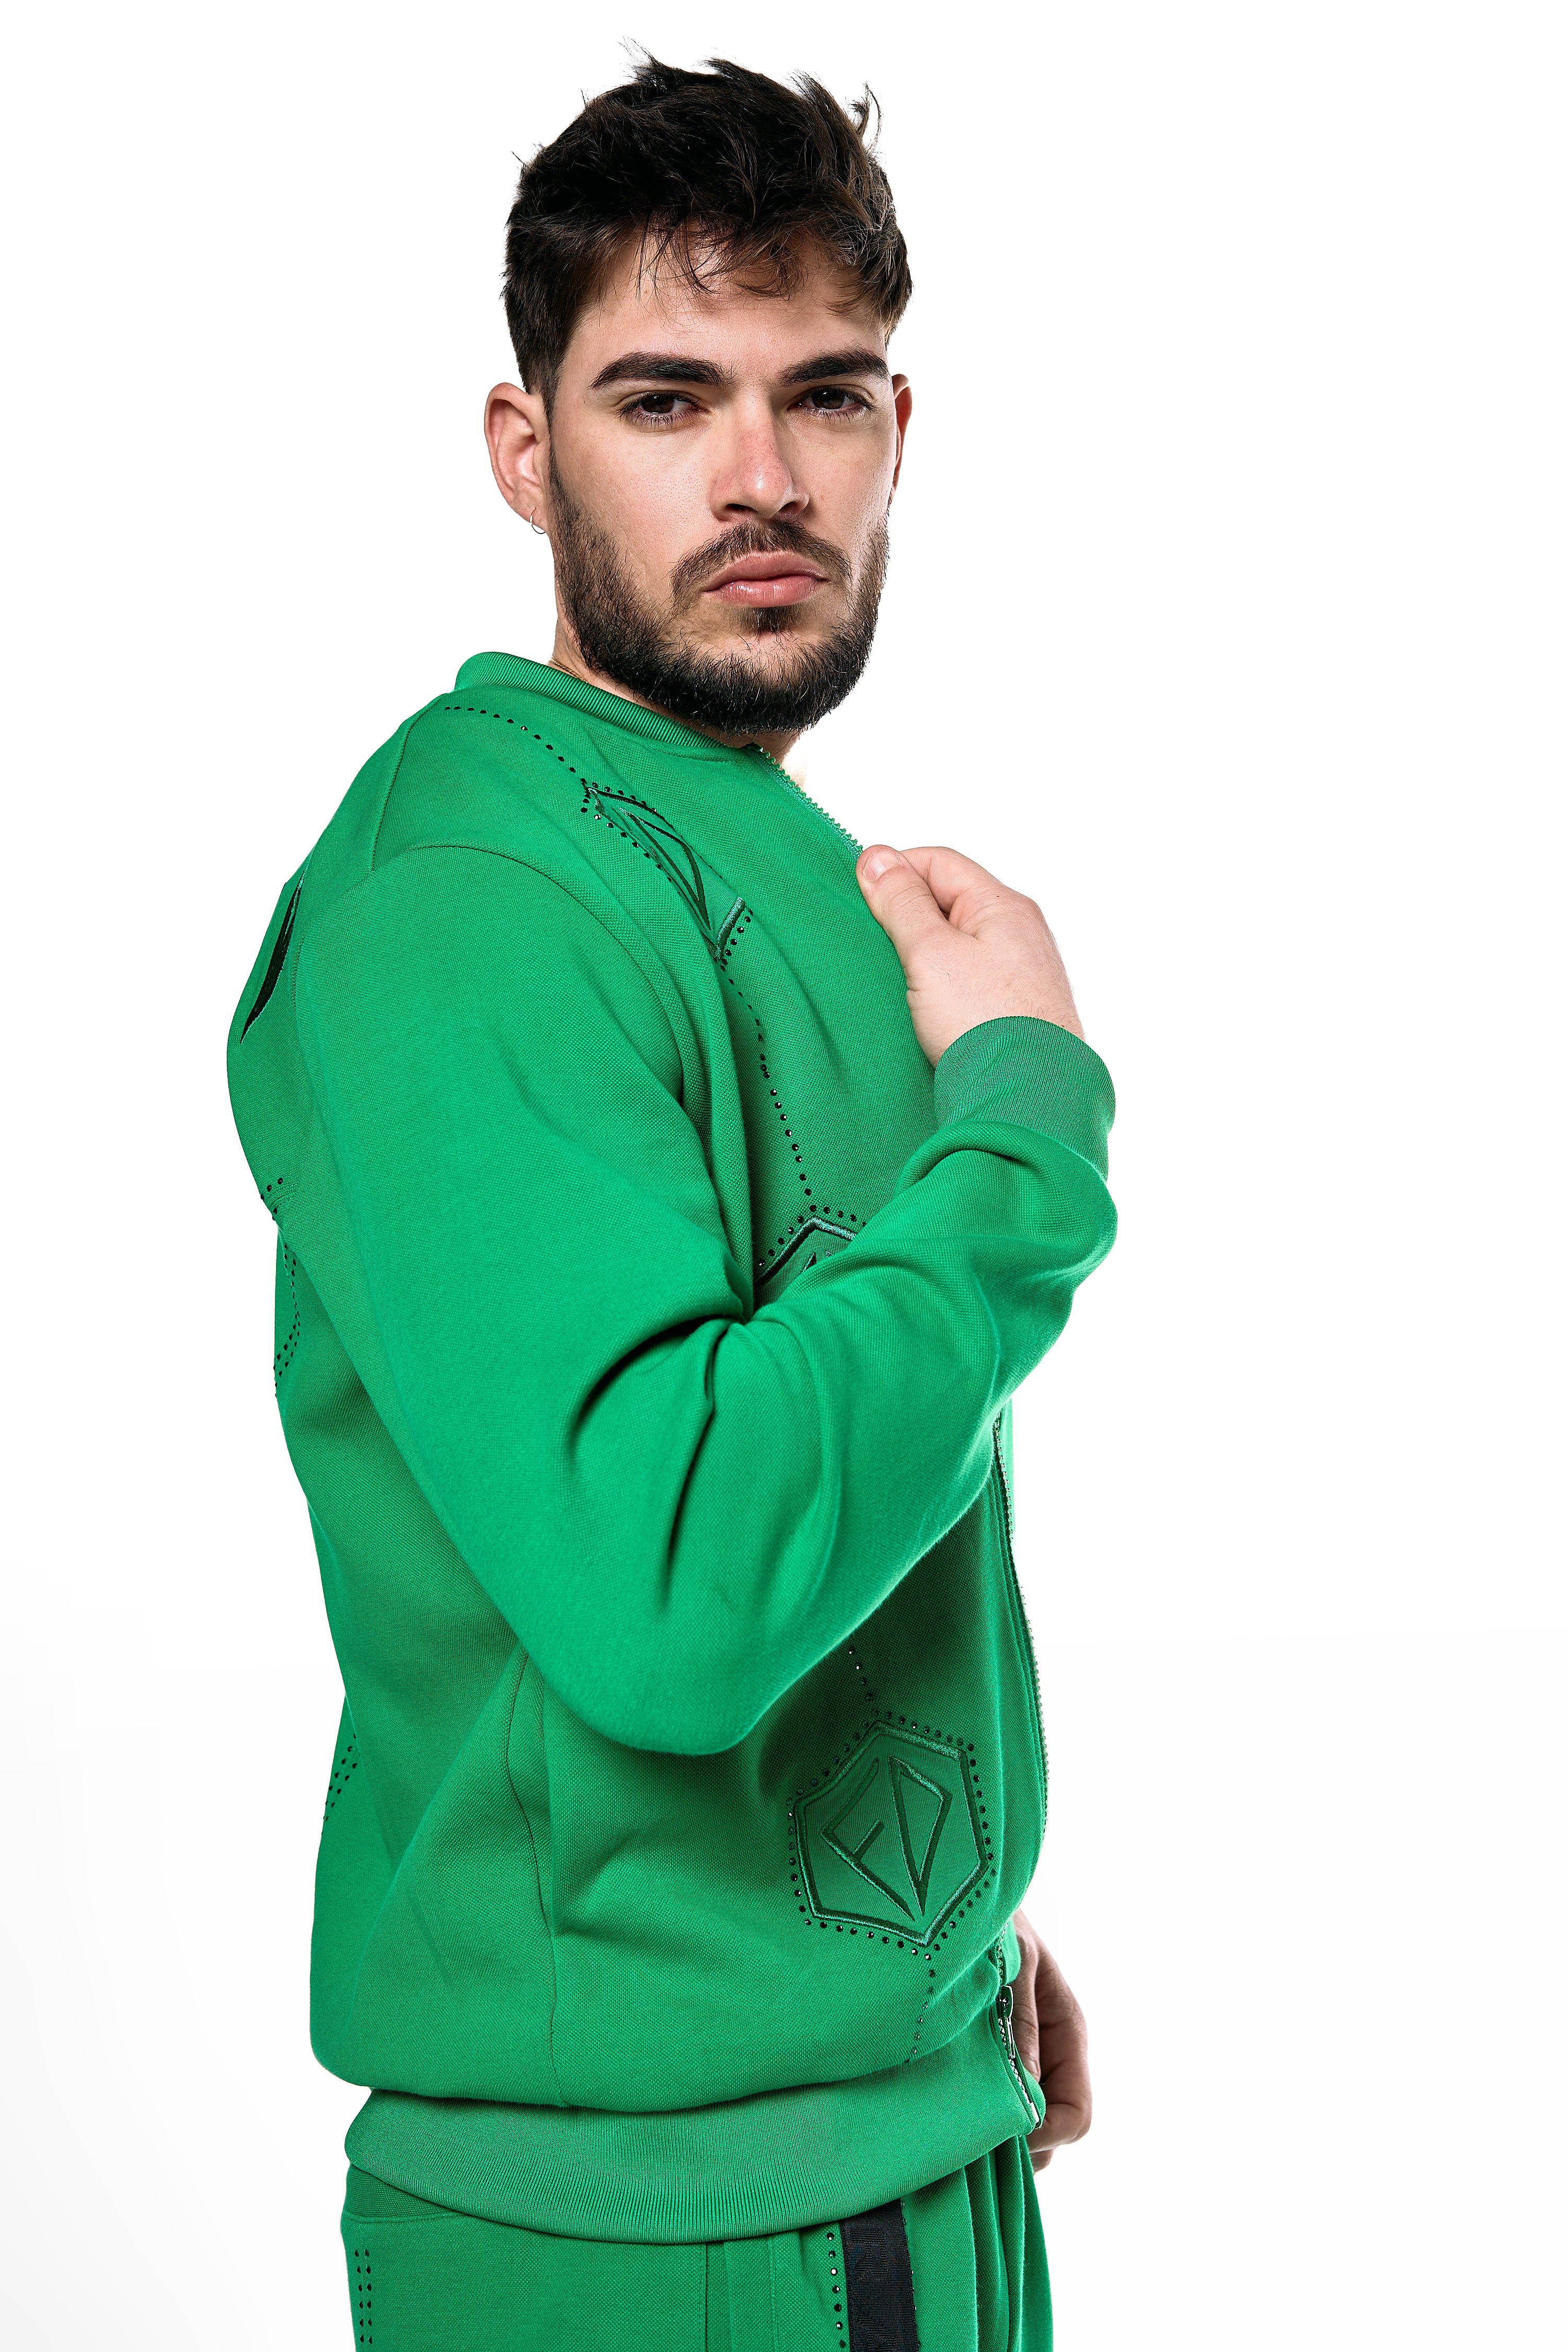 Men's Tracksuit with Crystals , Reflective Trim in Kelly Green with pants